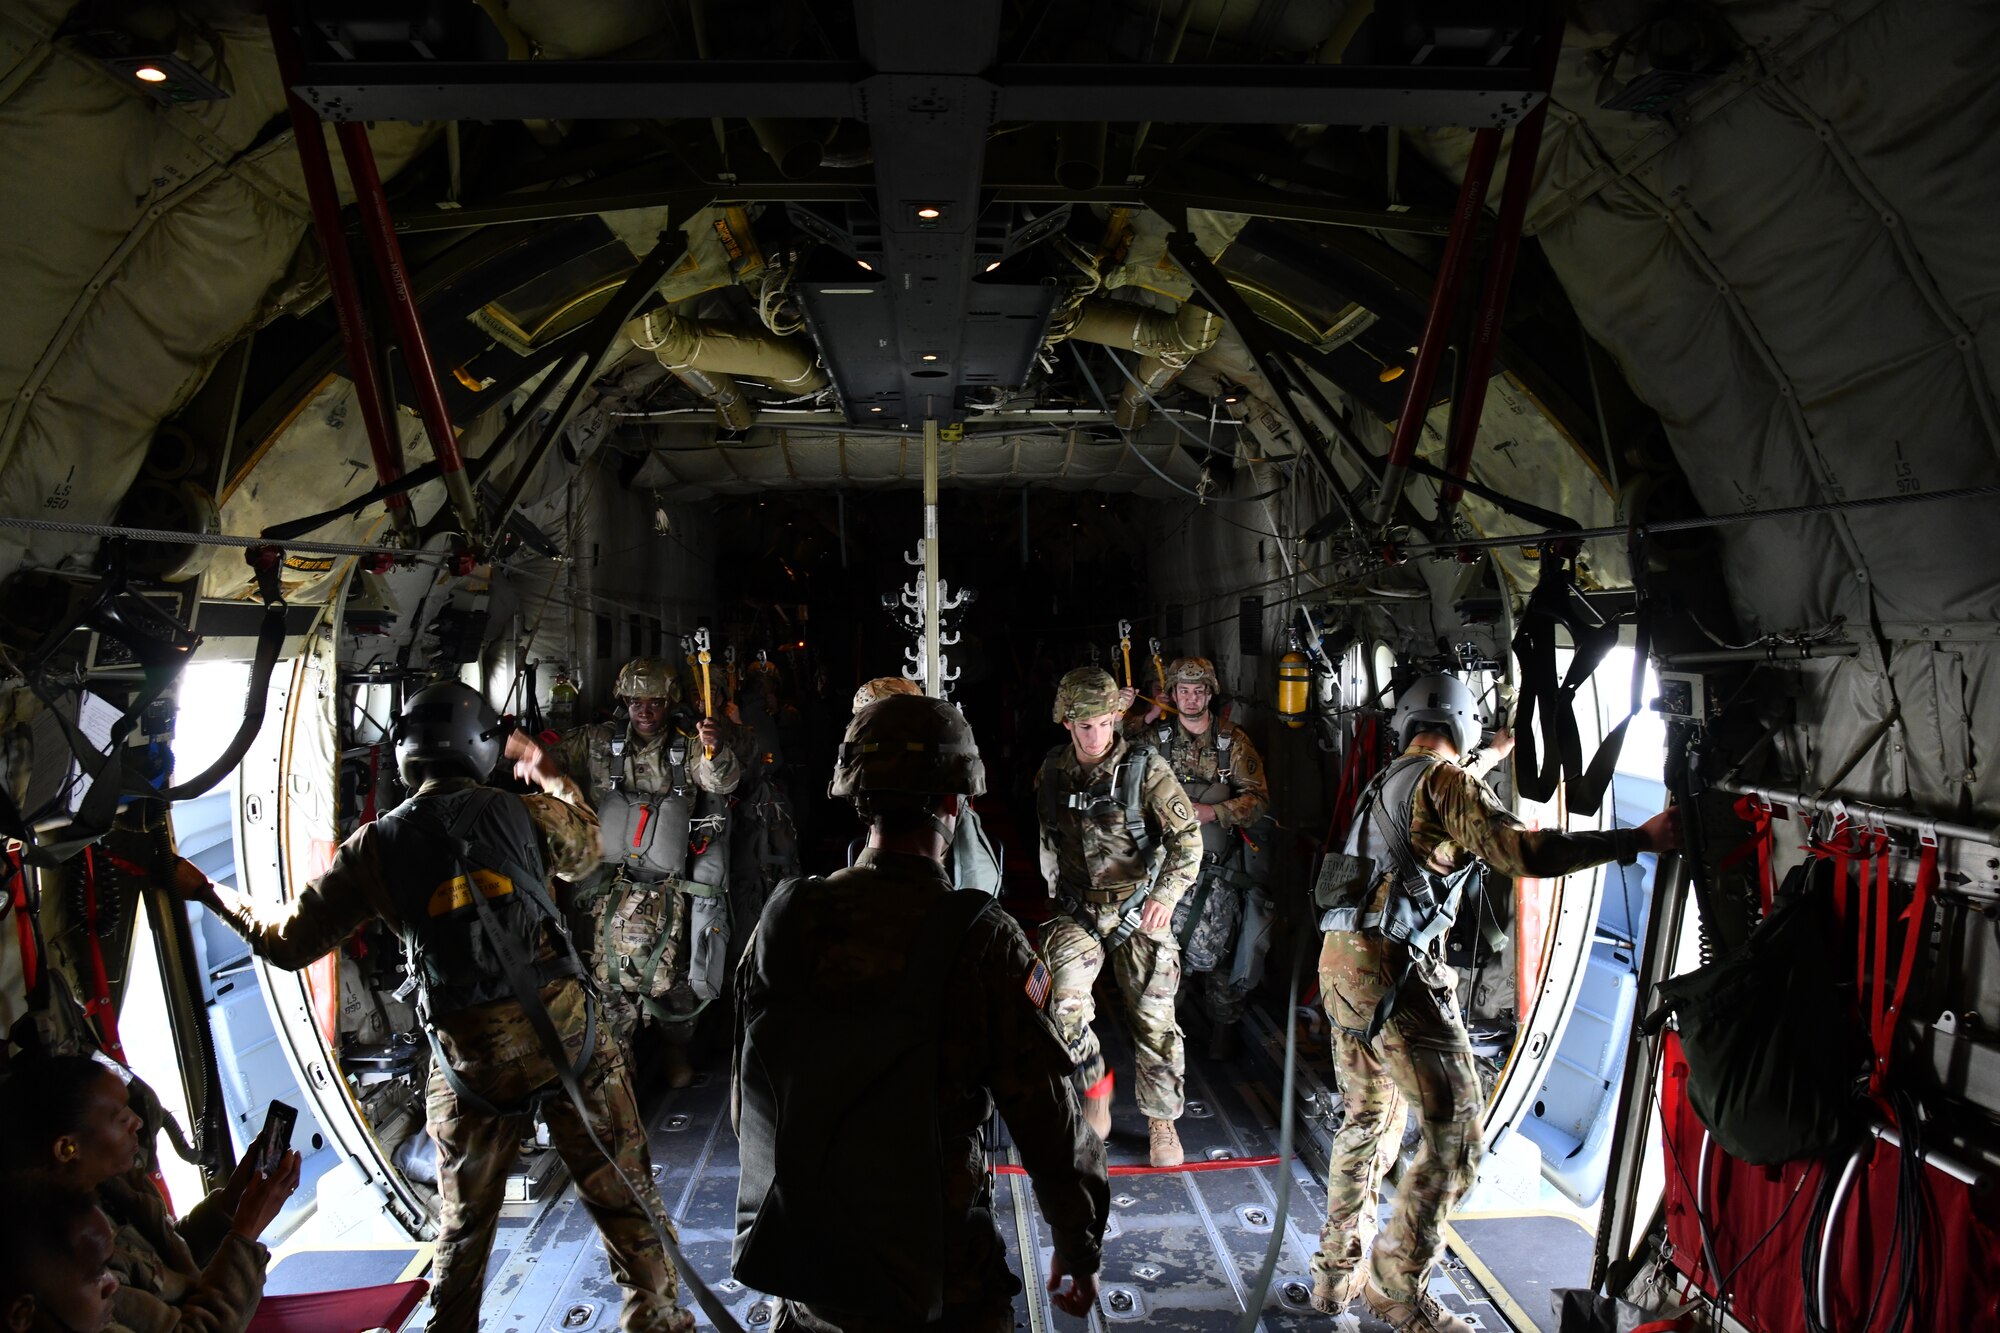 Master Sgt. Gary Bryant (left) and Tech. Sgt. Jacob Fountain (right), 815th Airlift Squadron loadmasters, watch outside the open troop doors until given the signal from the pilots to pass off the opened doors to the jumpmasters from the 4th Infantry Brigade Combat Team Airborne, 25th Infantry Division, who will release the paratroopers out of the C-130J Super Hercules during a training exercise, July 13-16, 2021. (U.S. Air Force photo by Master Sgt. Jessica Kendziorek)